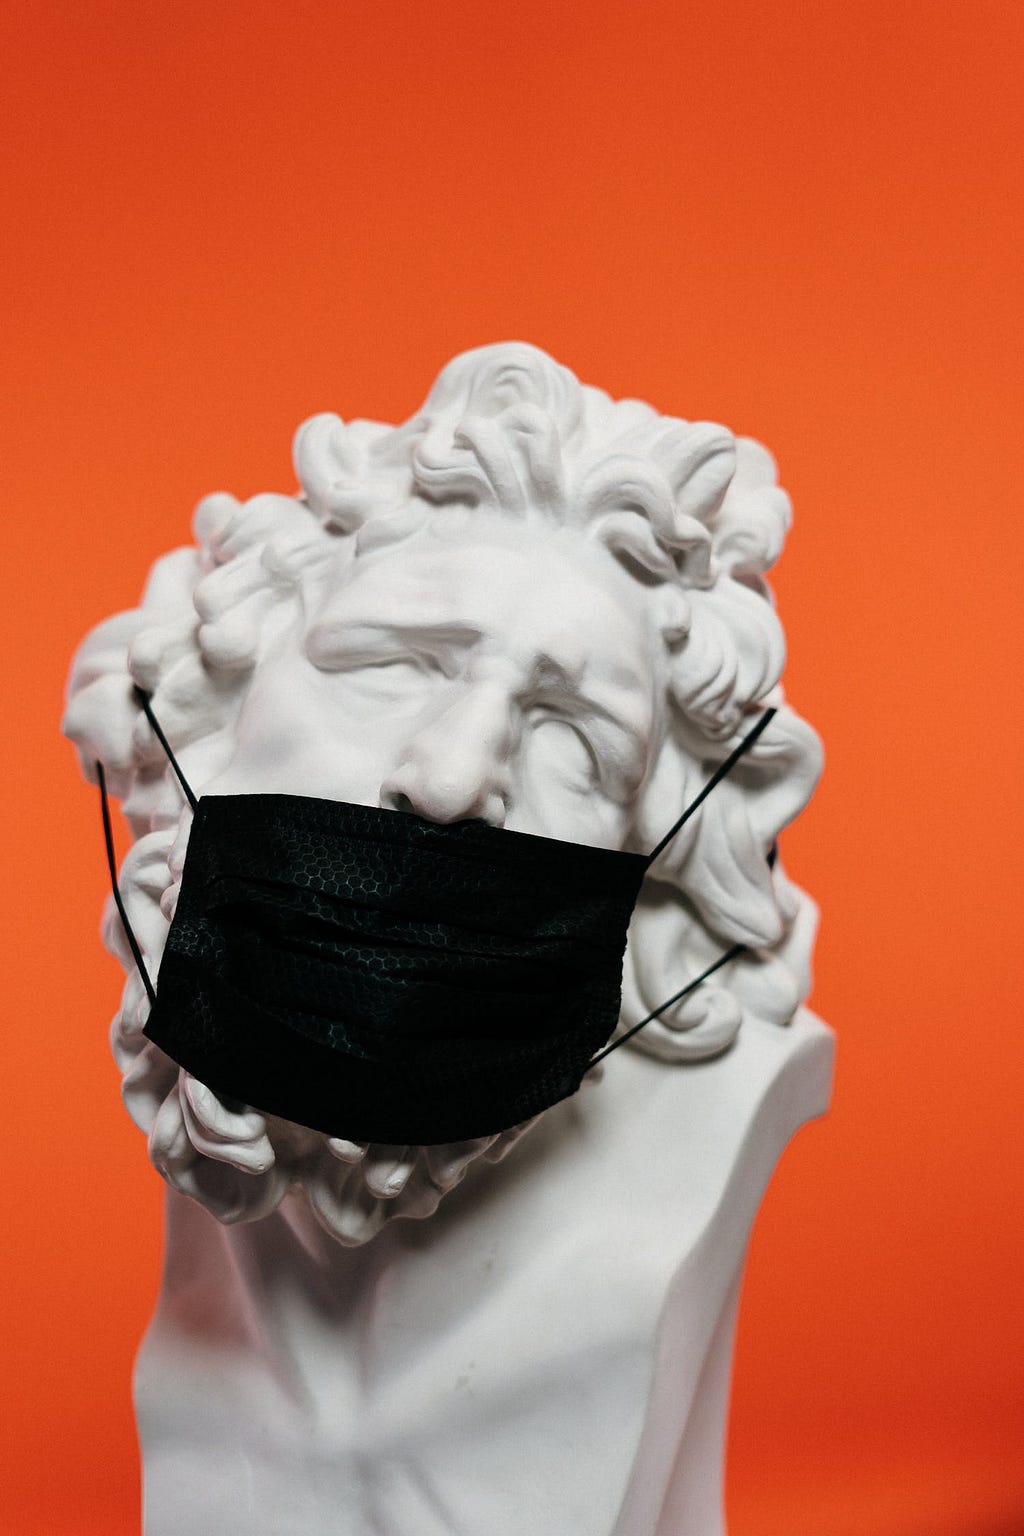 An ancient greek statue with a black medical mask in an orange background.